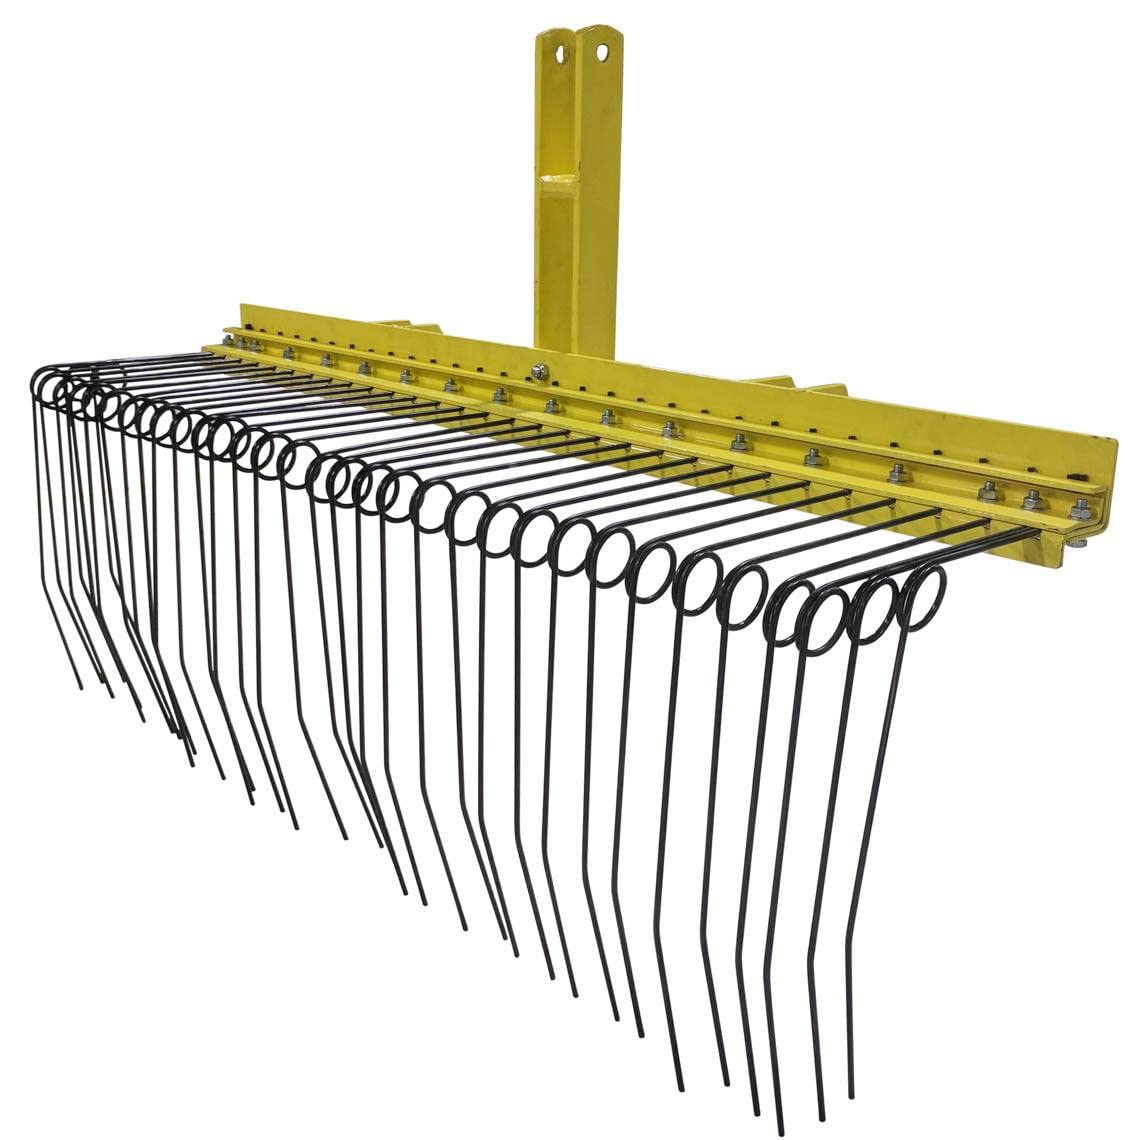 Titan Attachments 3 Point 6 FT Pine Straw Needle Rake, Category 1 Tractors, Coil Spring Tines, Drag-Behind Landscape Rake